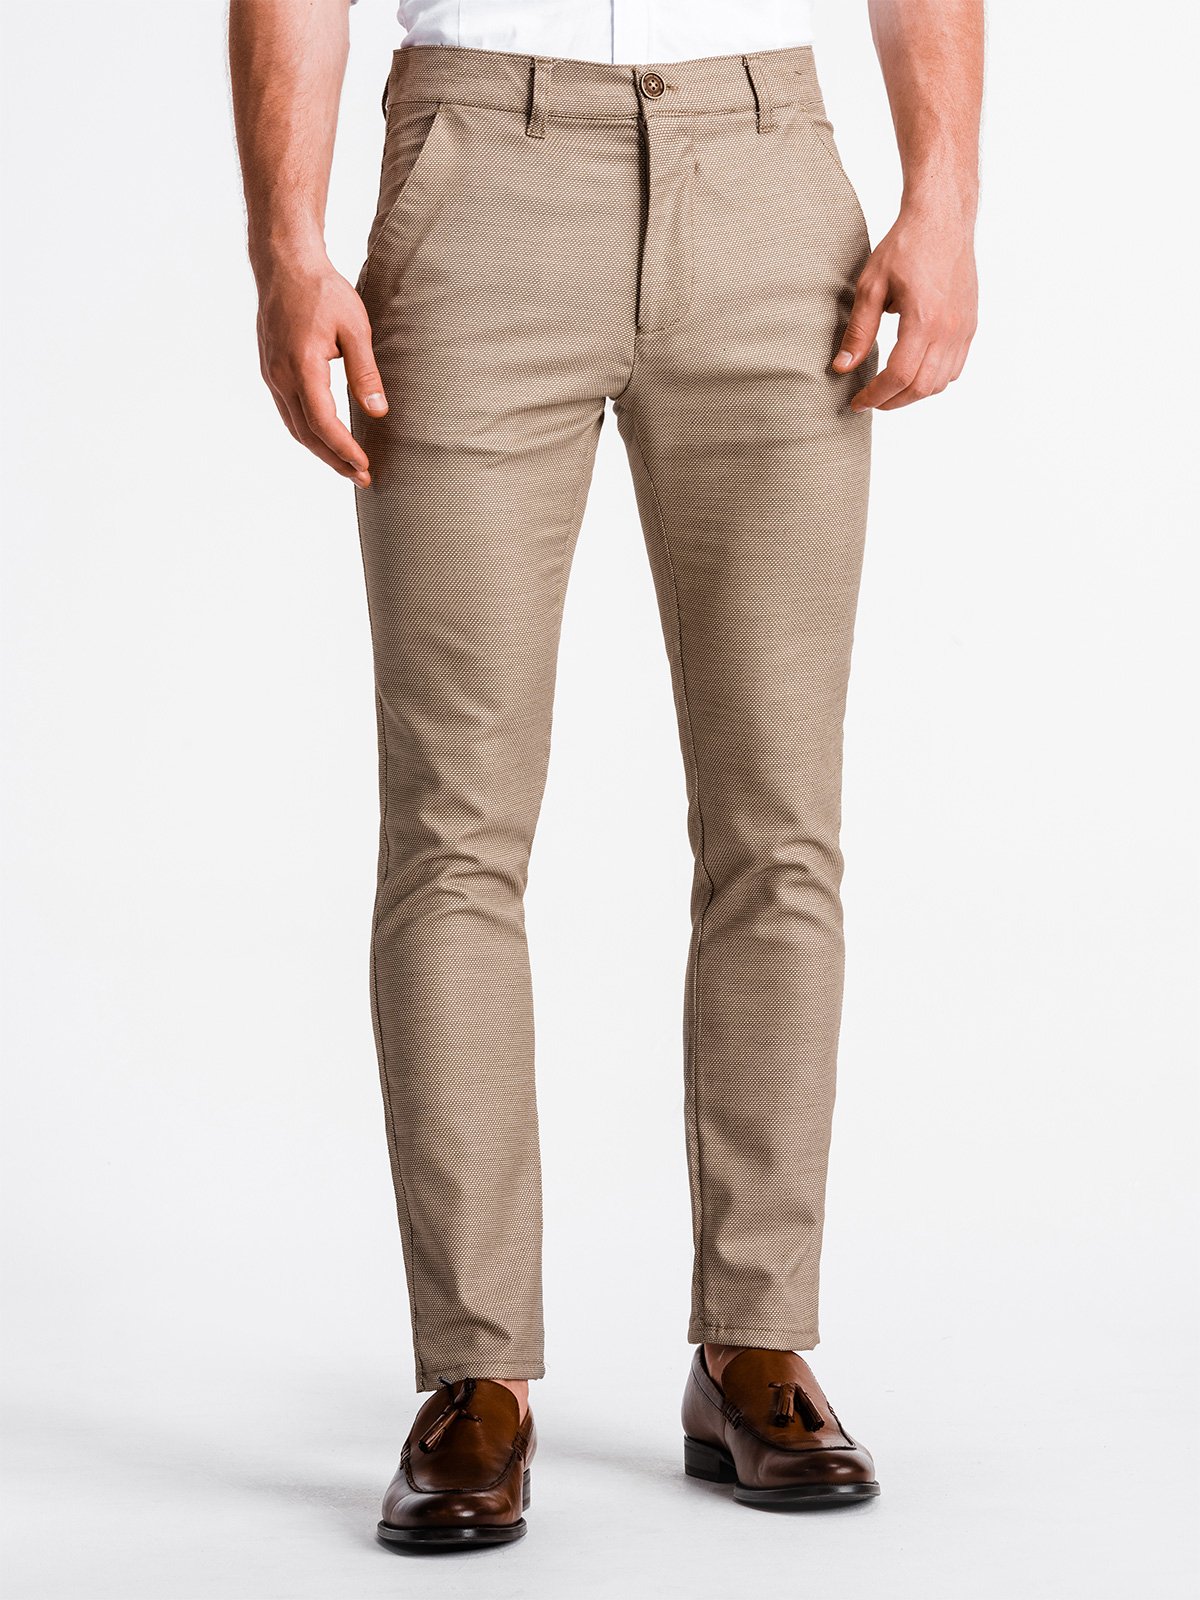 Men's pants chinos P831 - brown | MODONE wholesale - Clothing For Men